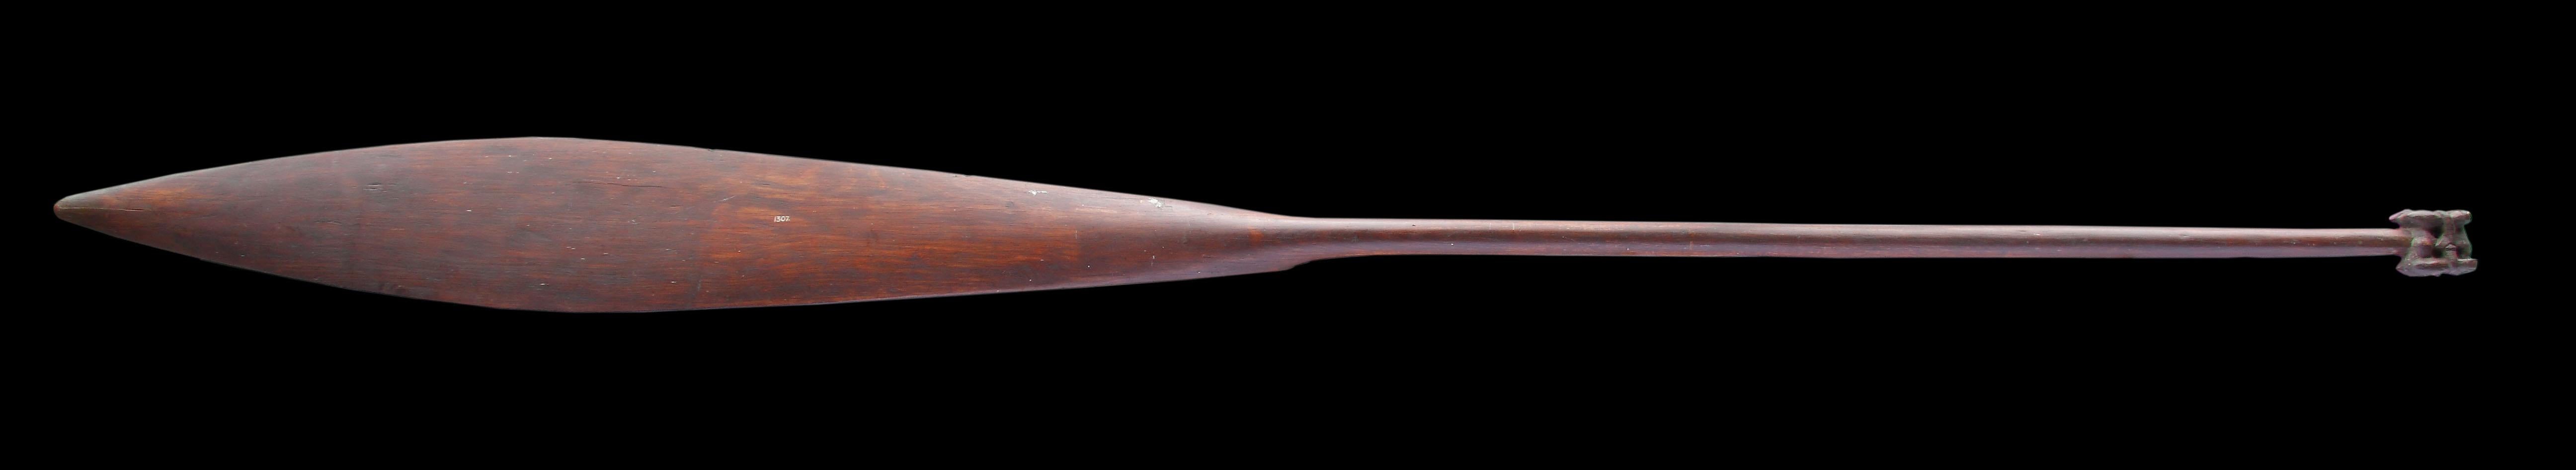 A Very Rare Long Maori Paddle ‘Hoe’ 
Superb colour and patina 
Wood
Maori / New Zealand 
Late 18th / early 19th Century

Size: 217cm long - 85½ ins long

Provenance: 
W.D. Webster, Bicester, no. 1307 
Lt. Gen. A.H.L.F. Pitt-Rivers, acquired from the